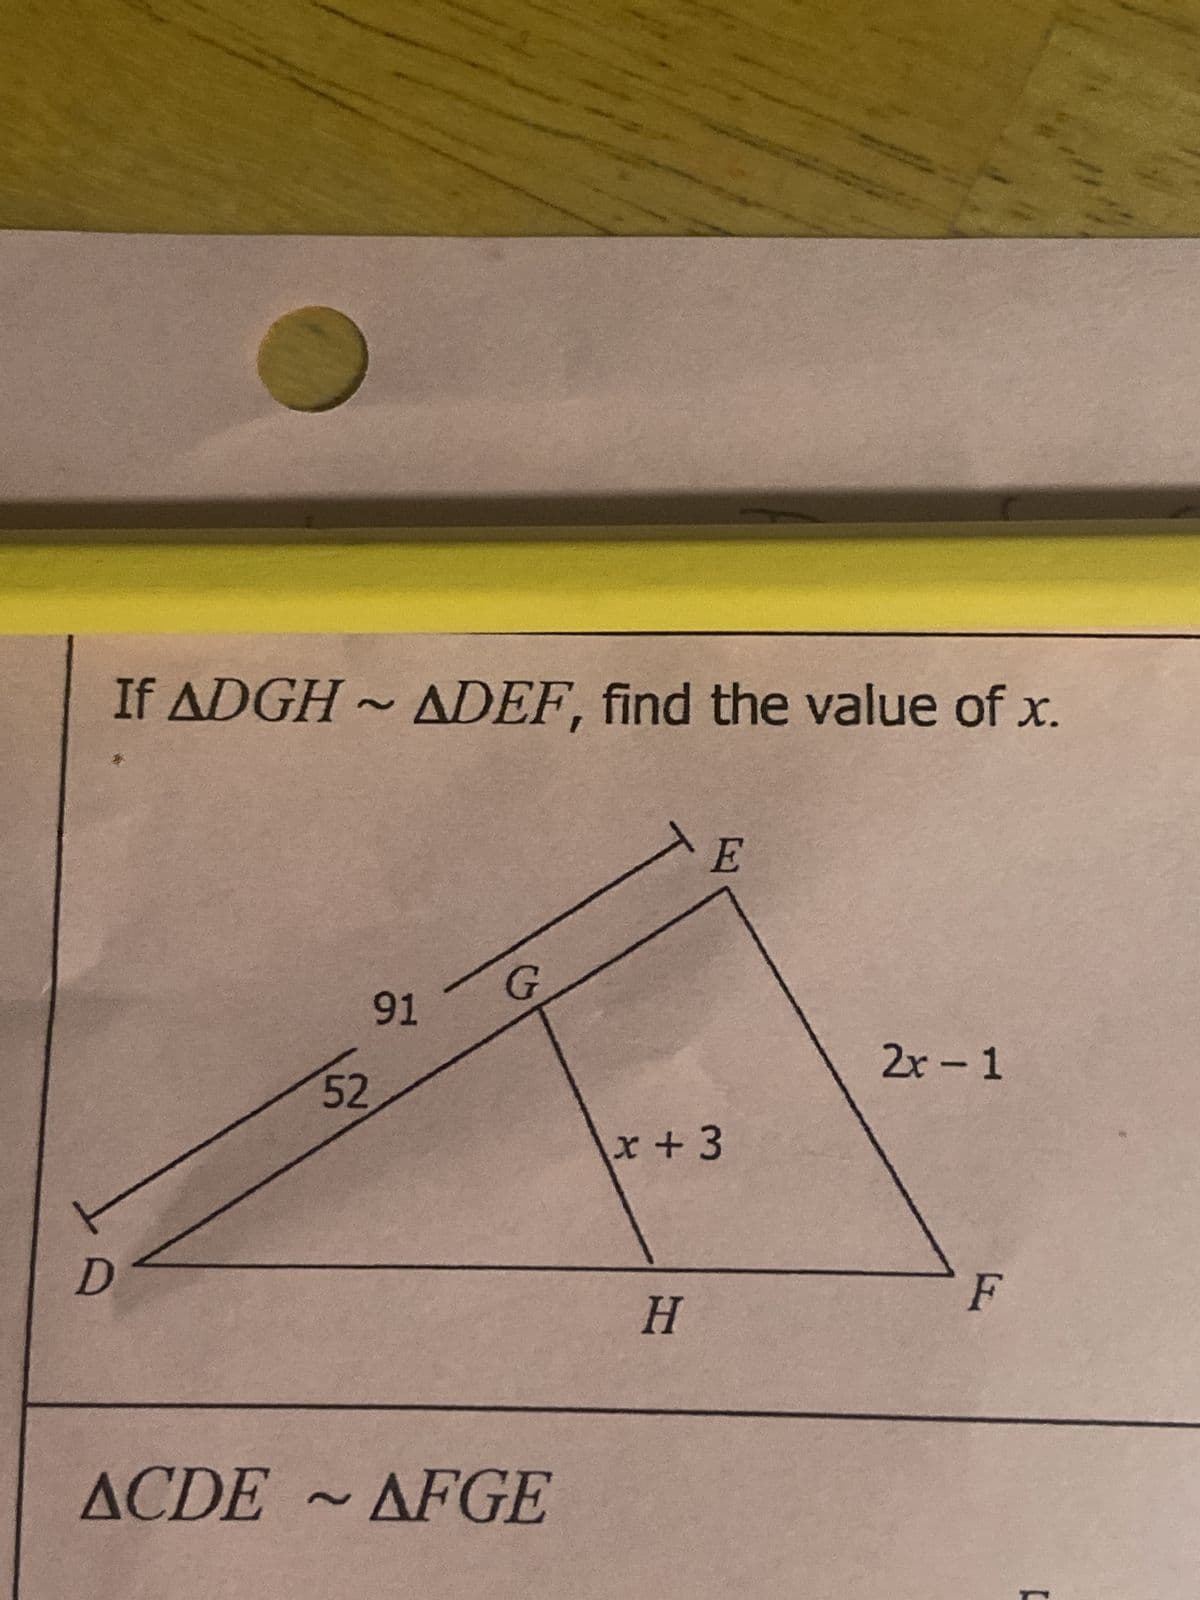 If ADGH~ ADEF, find the value of x.
D
52
91
~
G
ACDE AFGE
E
x +3
H
2x-1
F